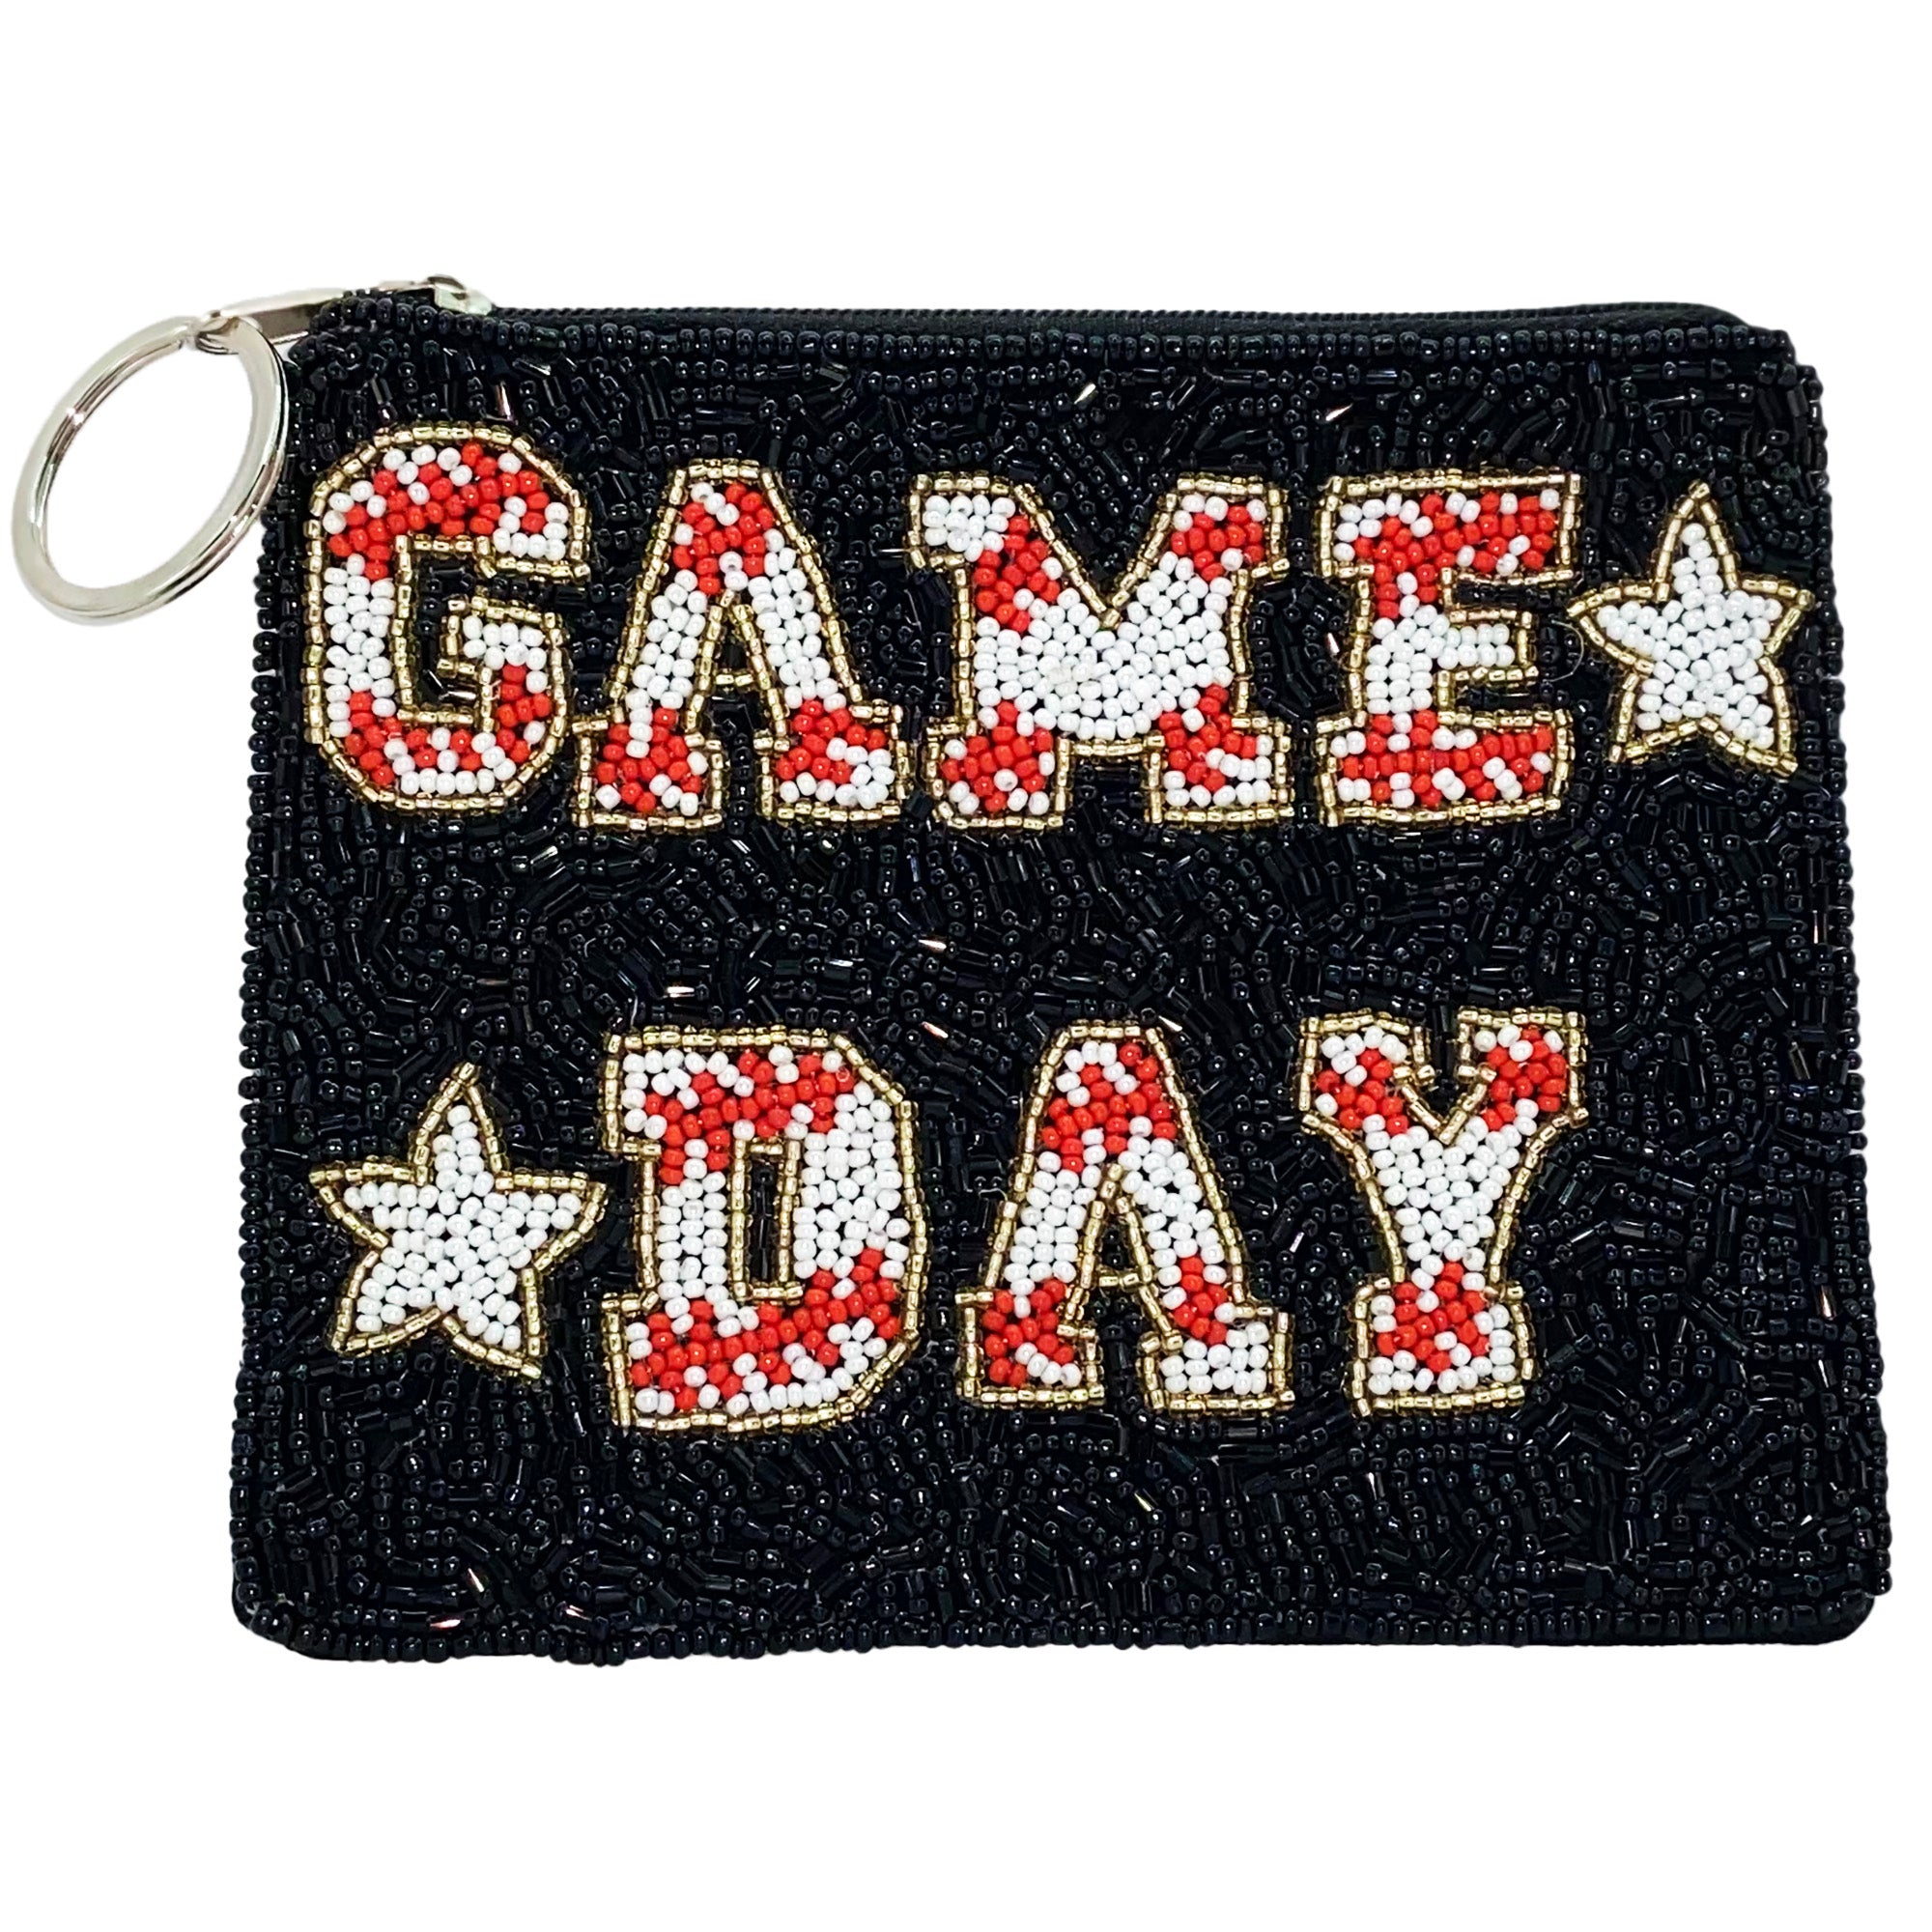 LA CHIC BASEBALL GAMEDAY COIN POUCH